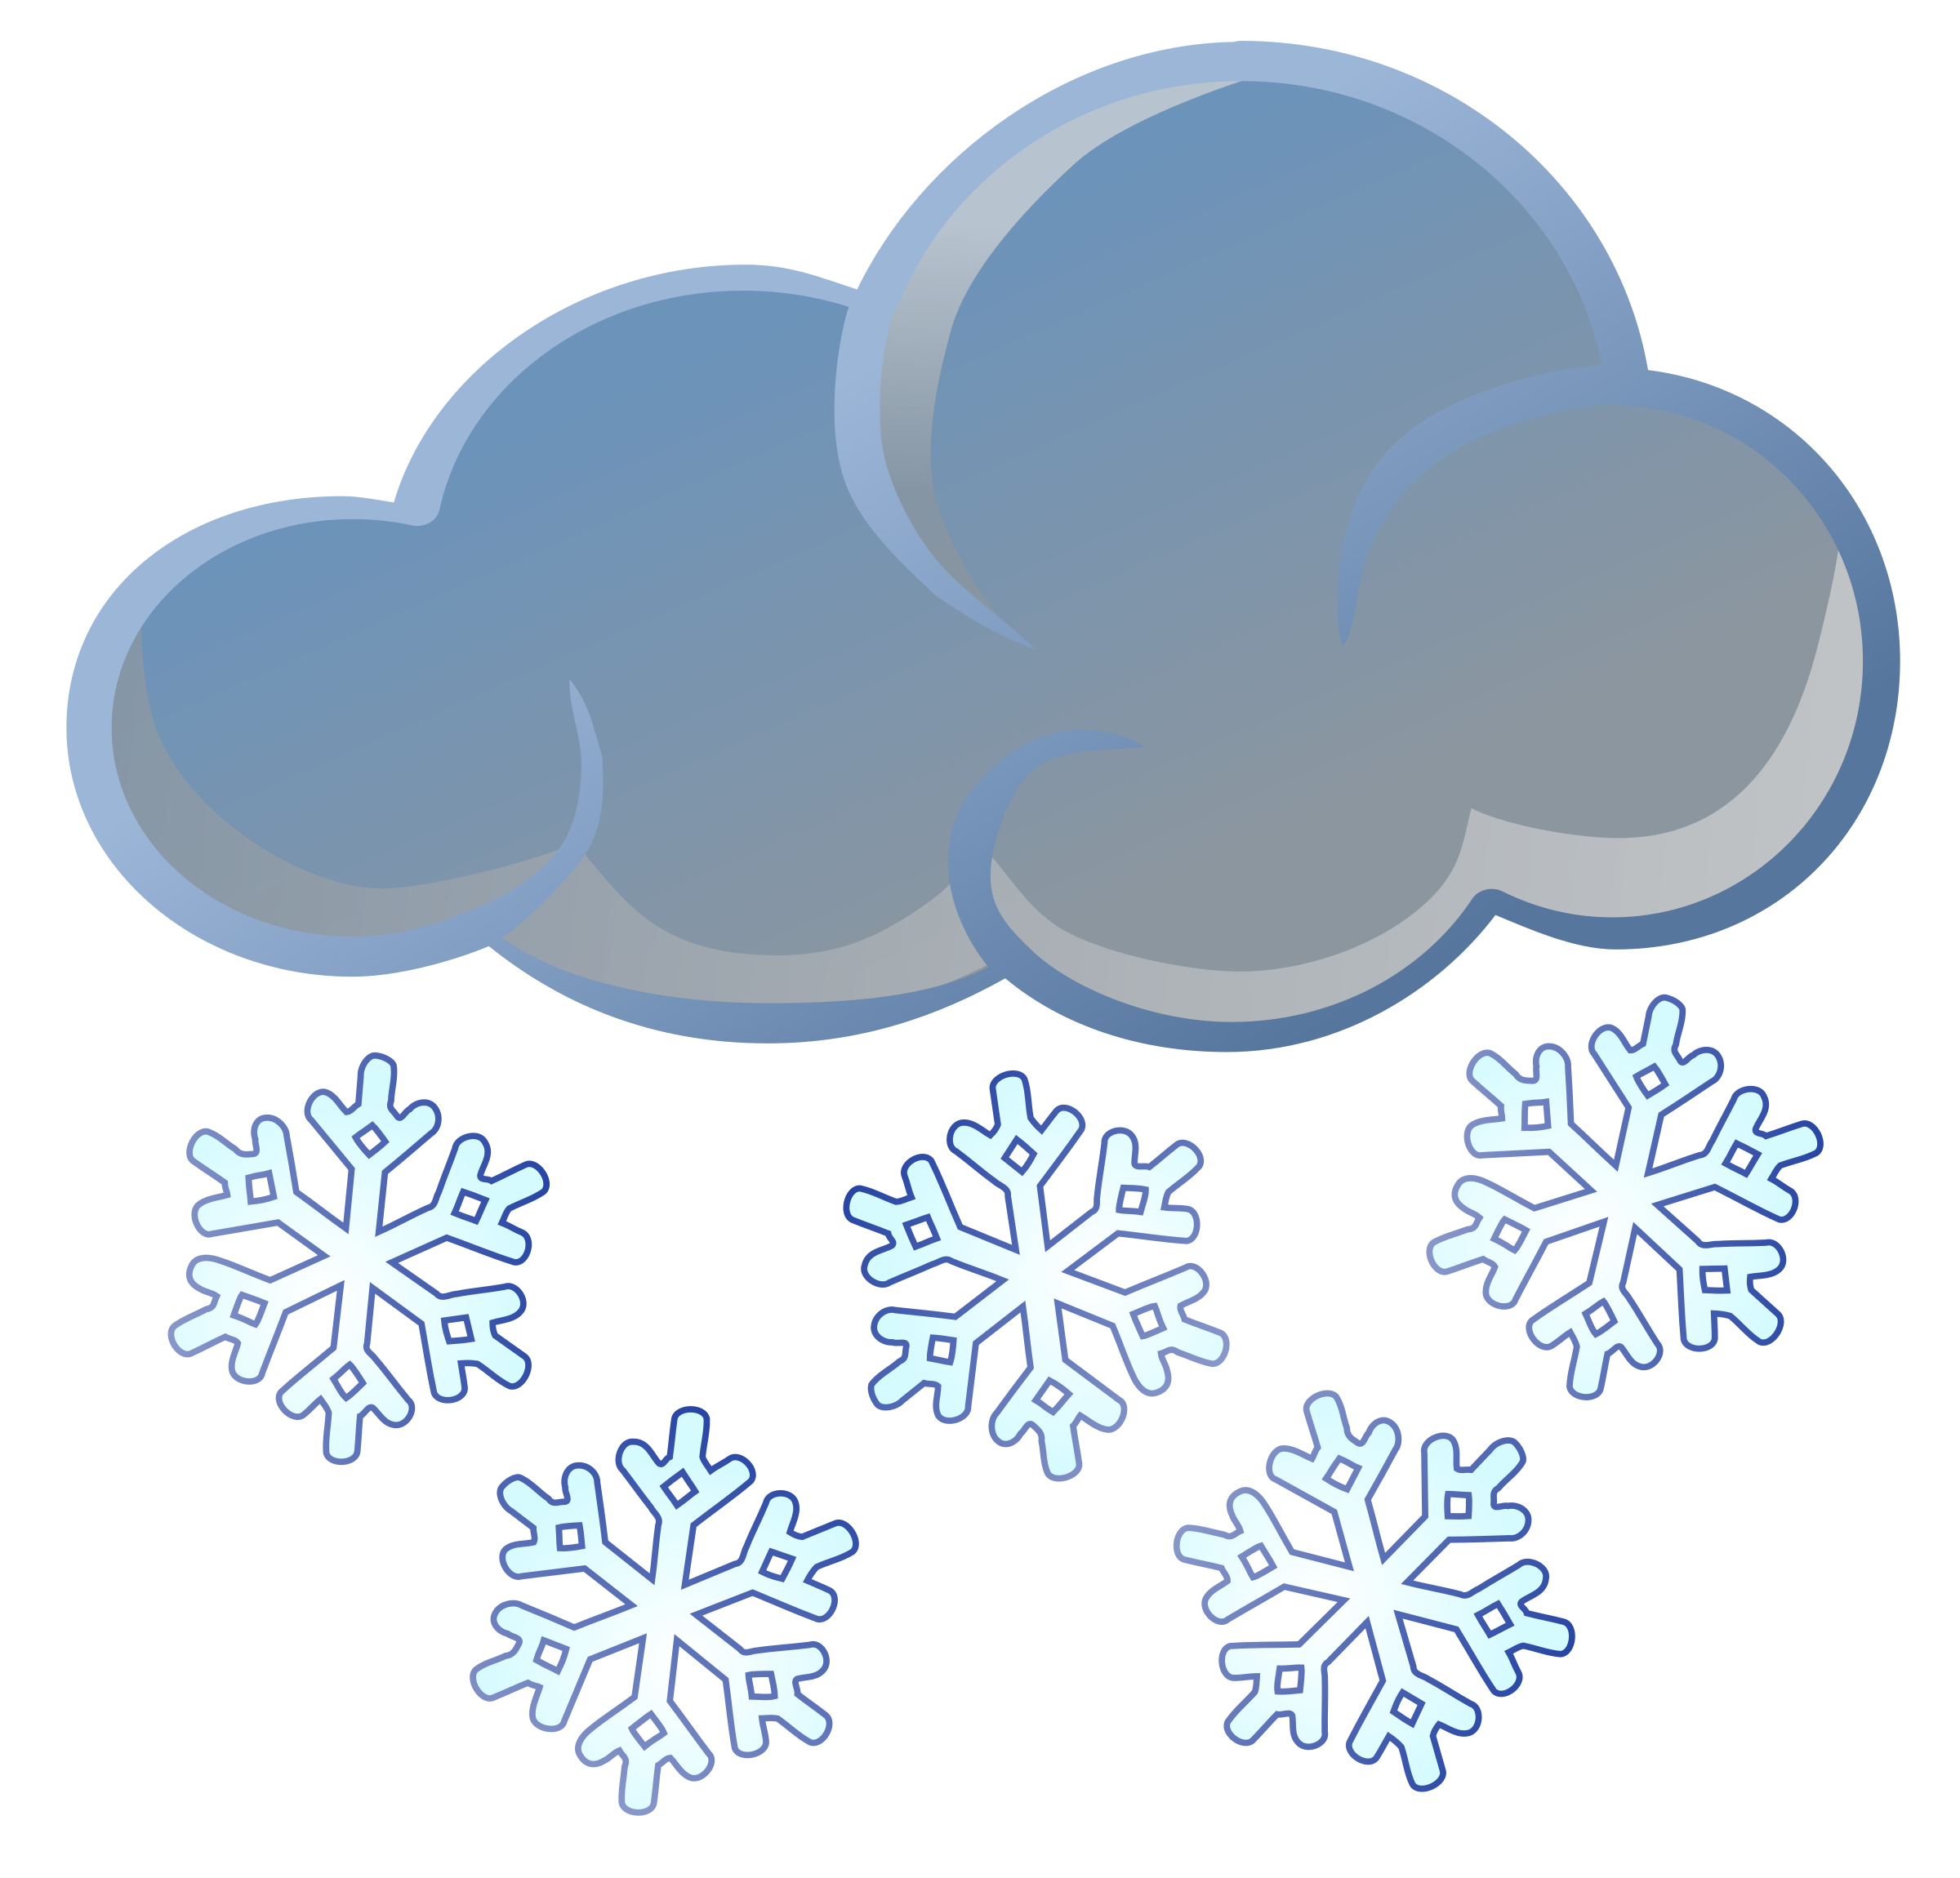 snow weather clipart - photo #26